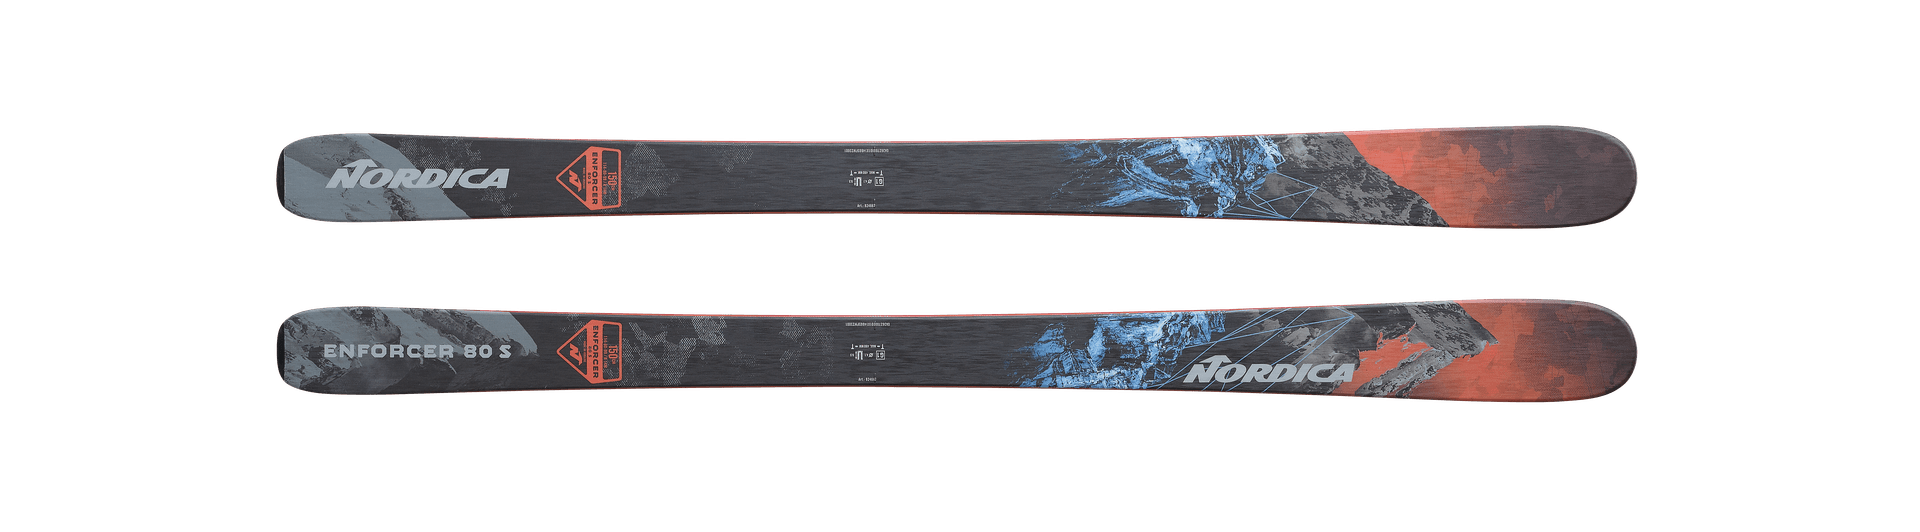 Picture of the Nordica Enforcer 80 s skis.